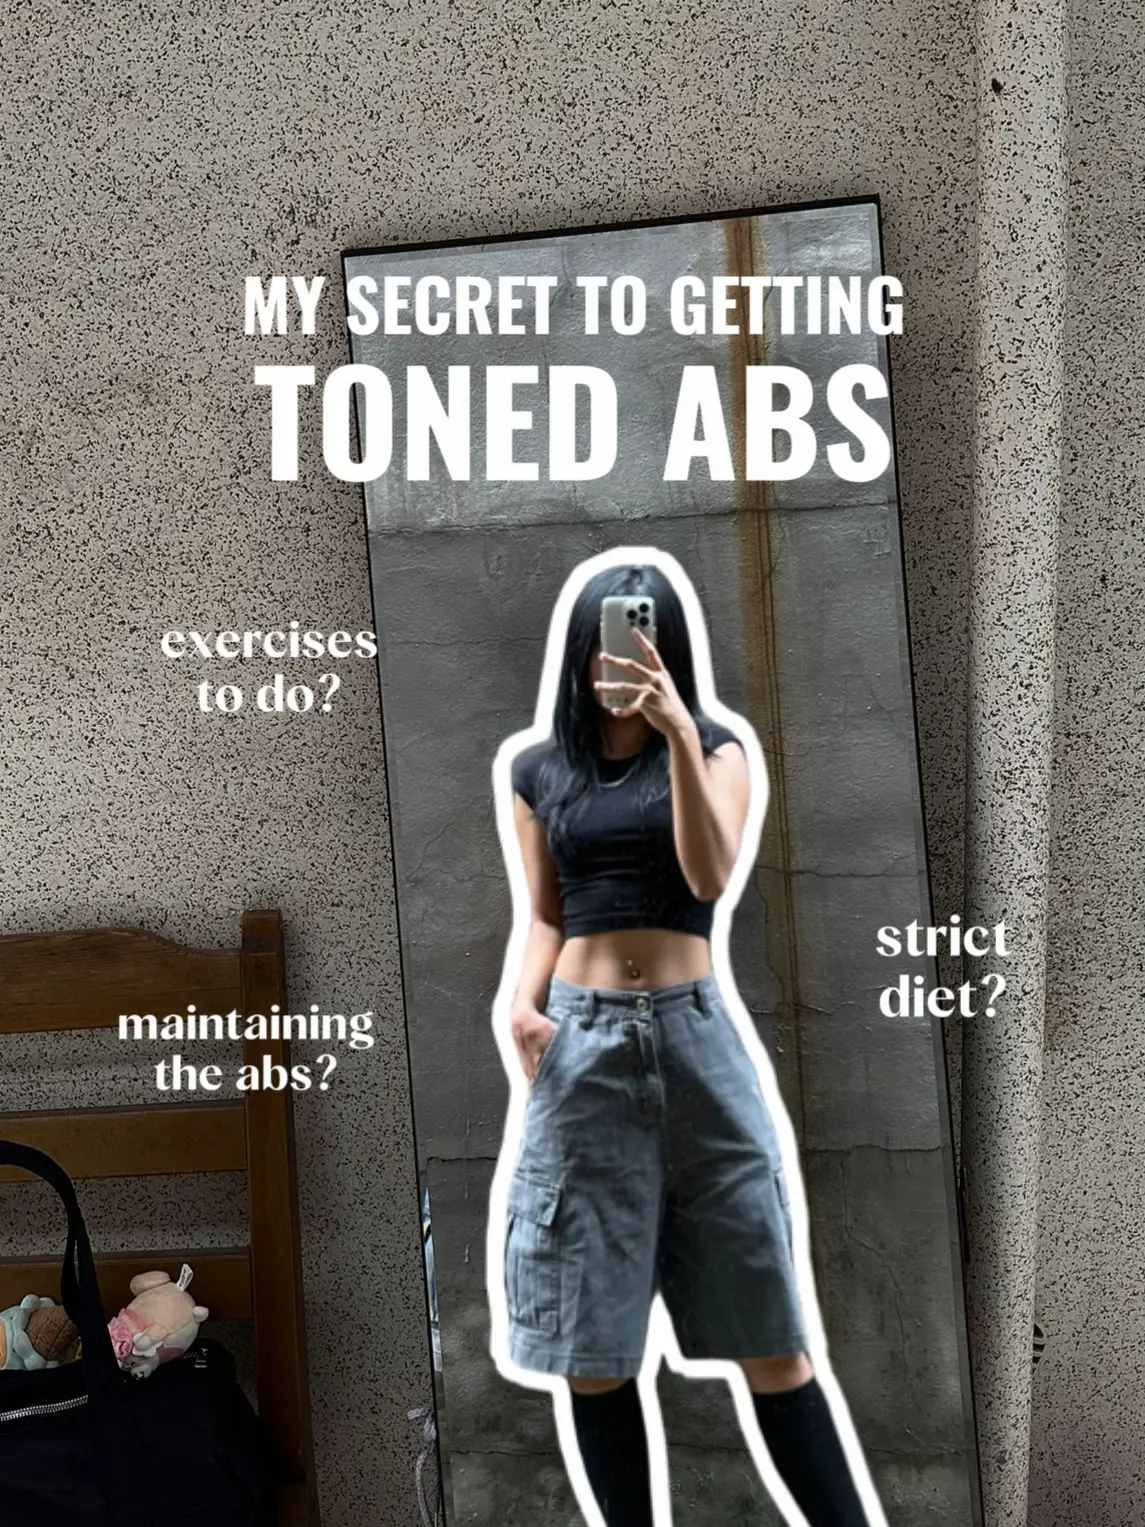 My secret to getting toned abs 💪🏻's images